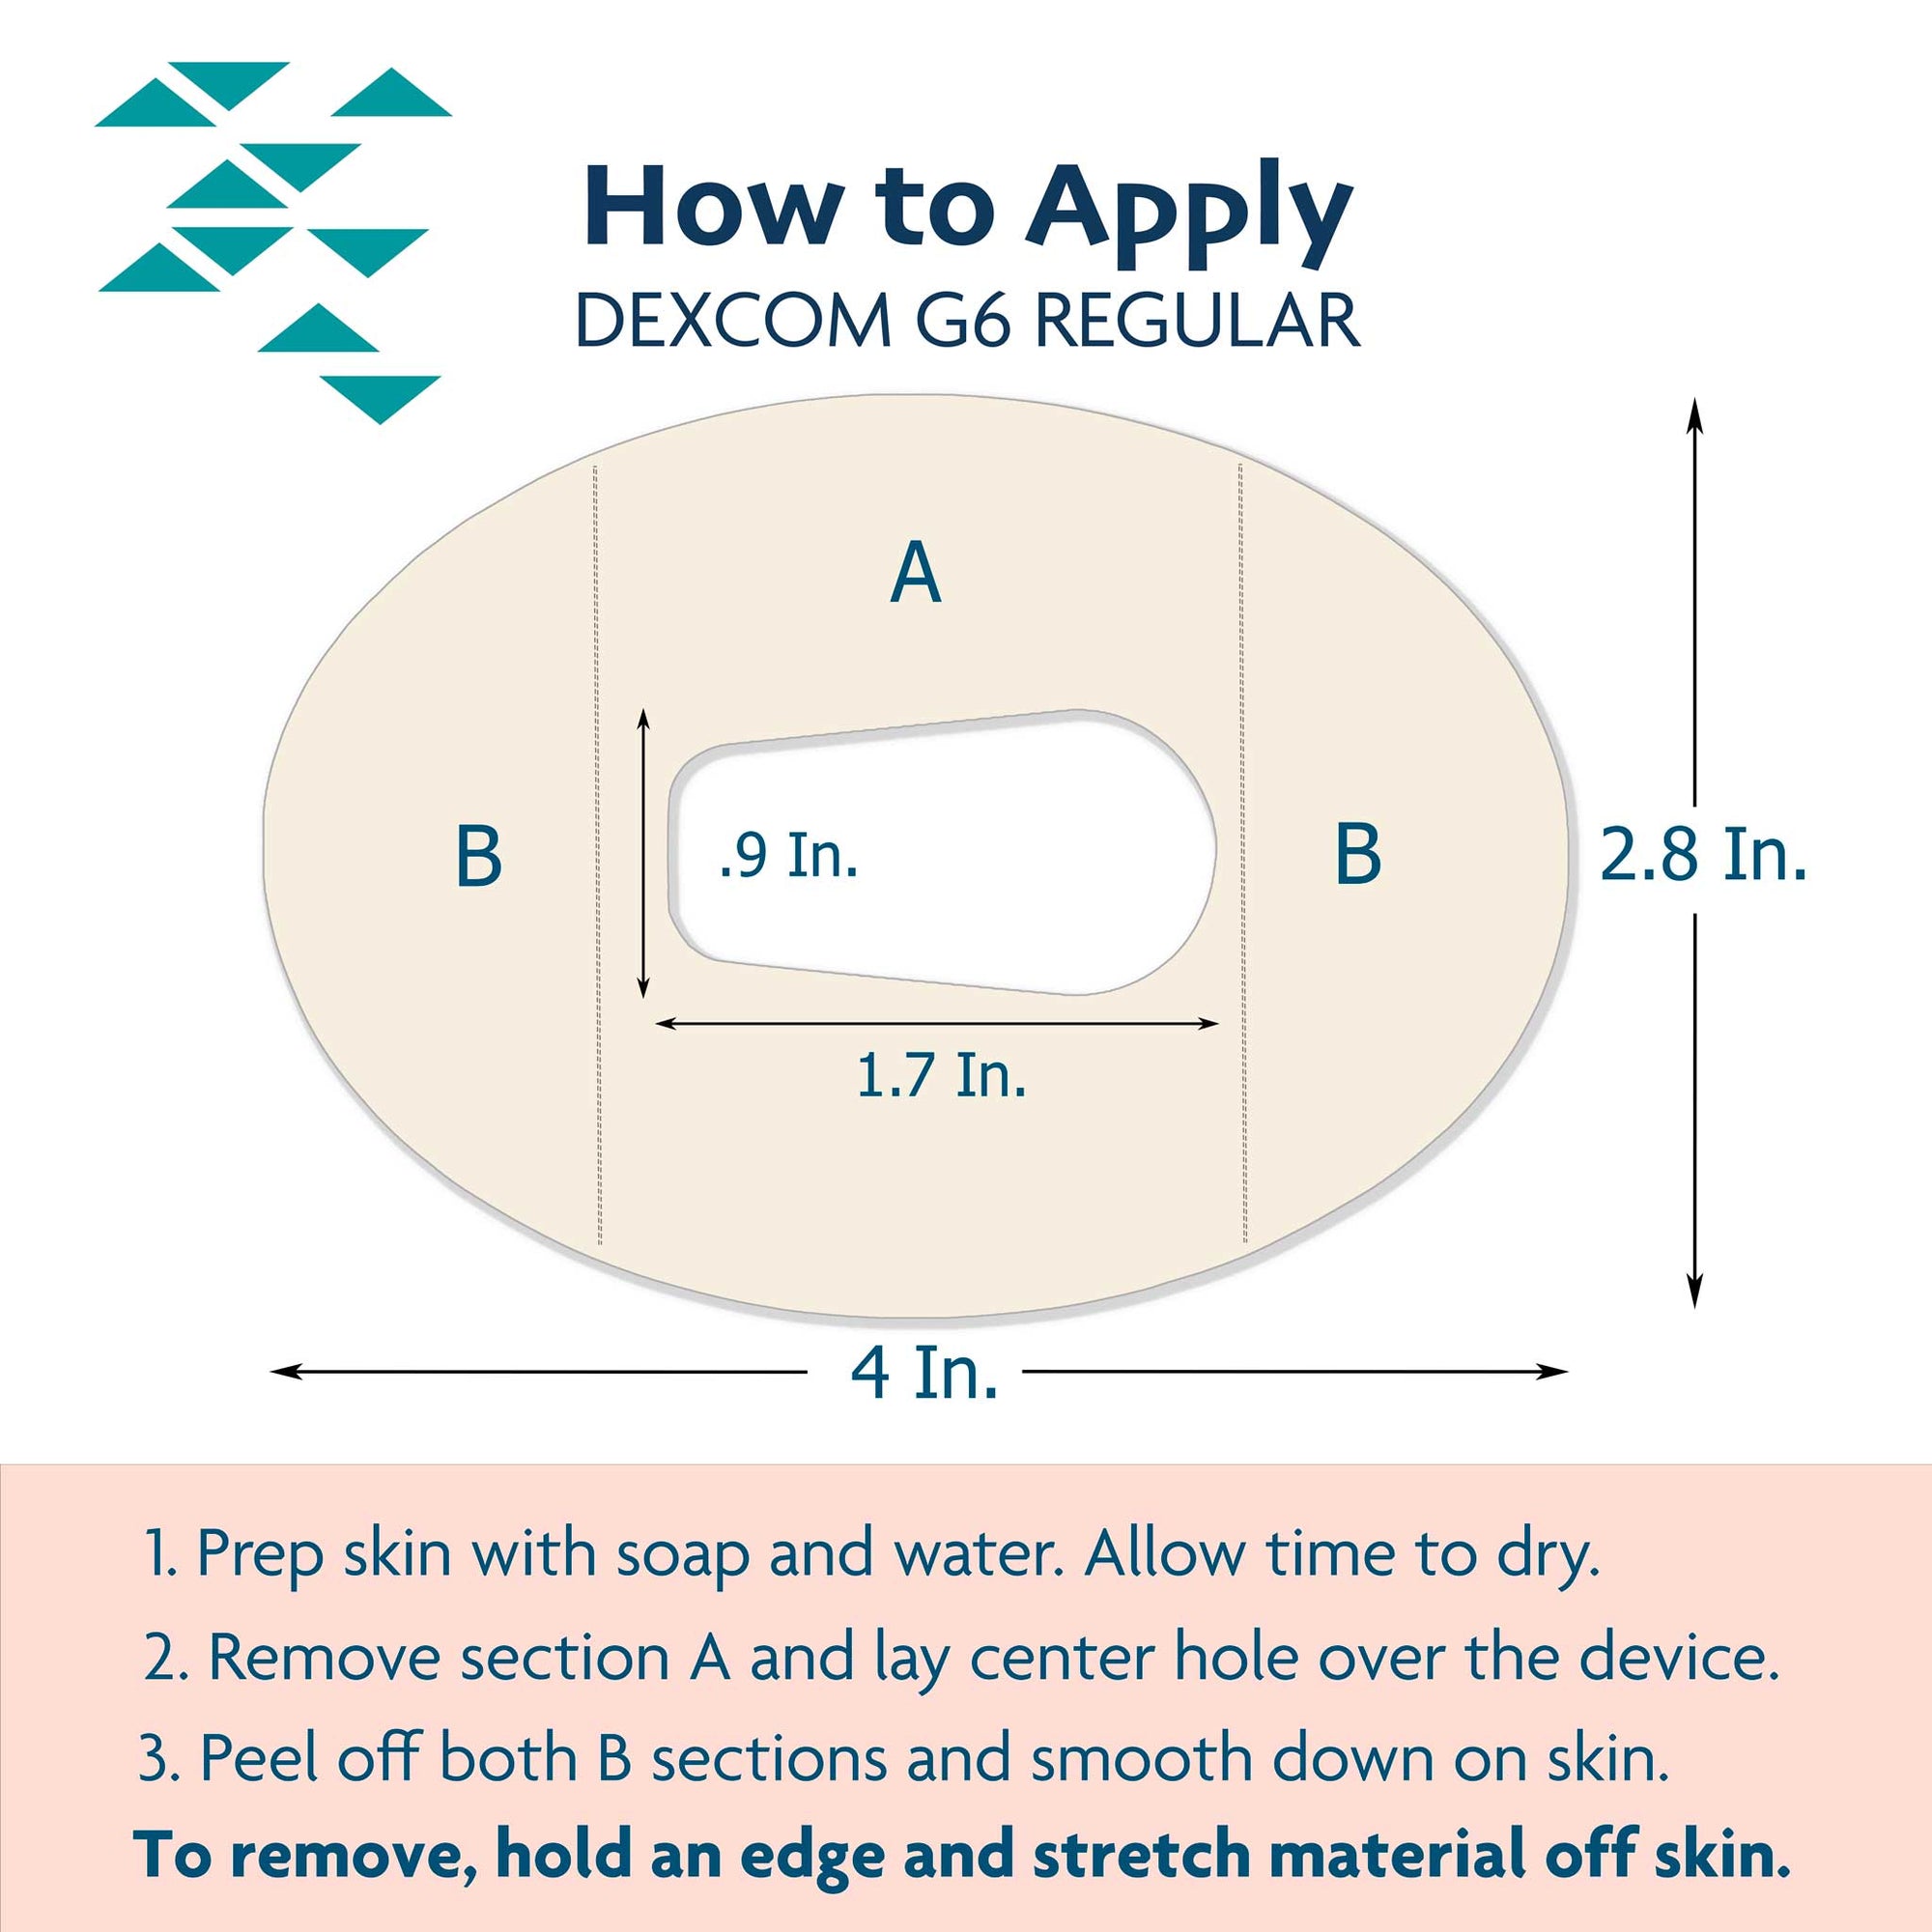 ExpressionMed Guide to use Dexcom G6 adhesive on CGM infusion site properly